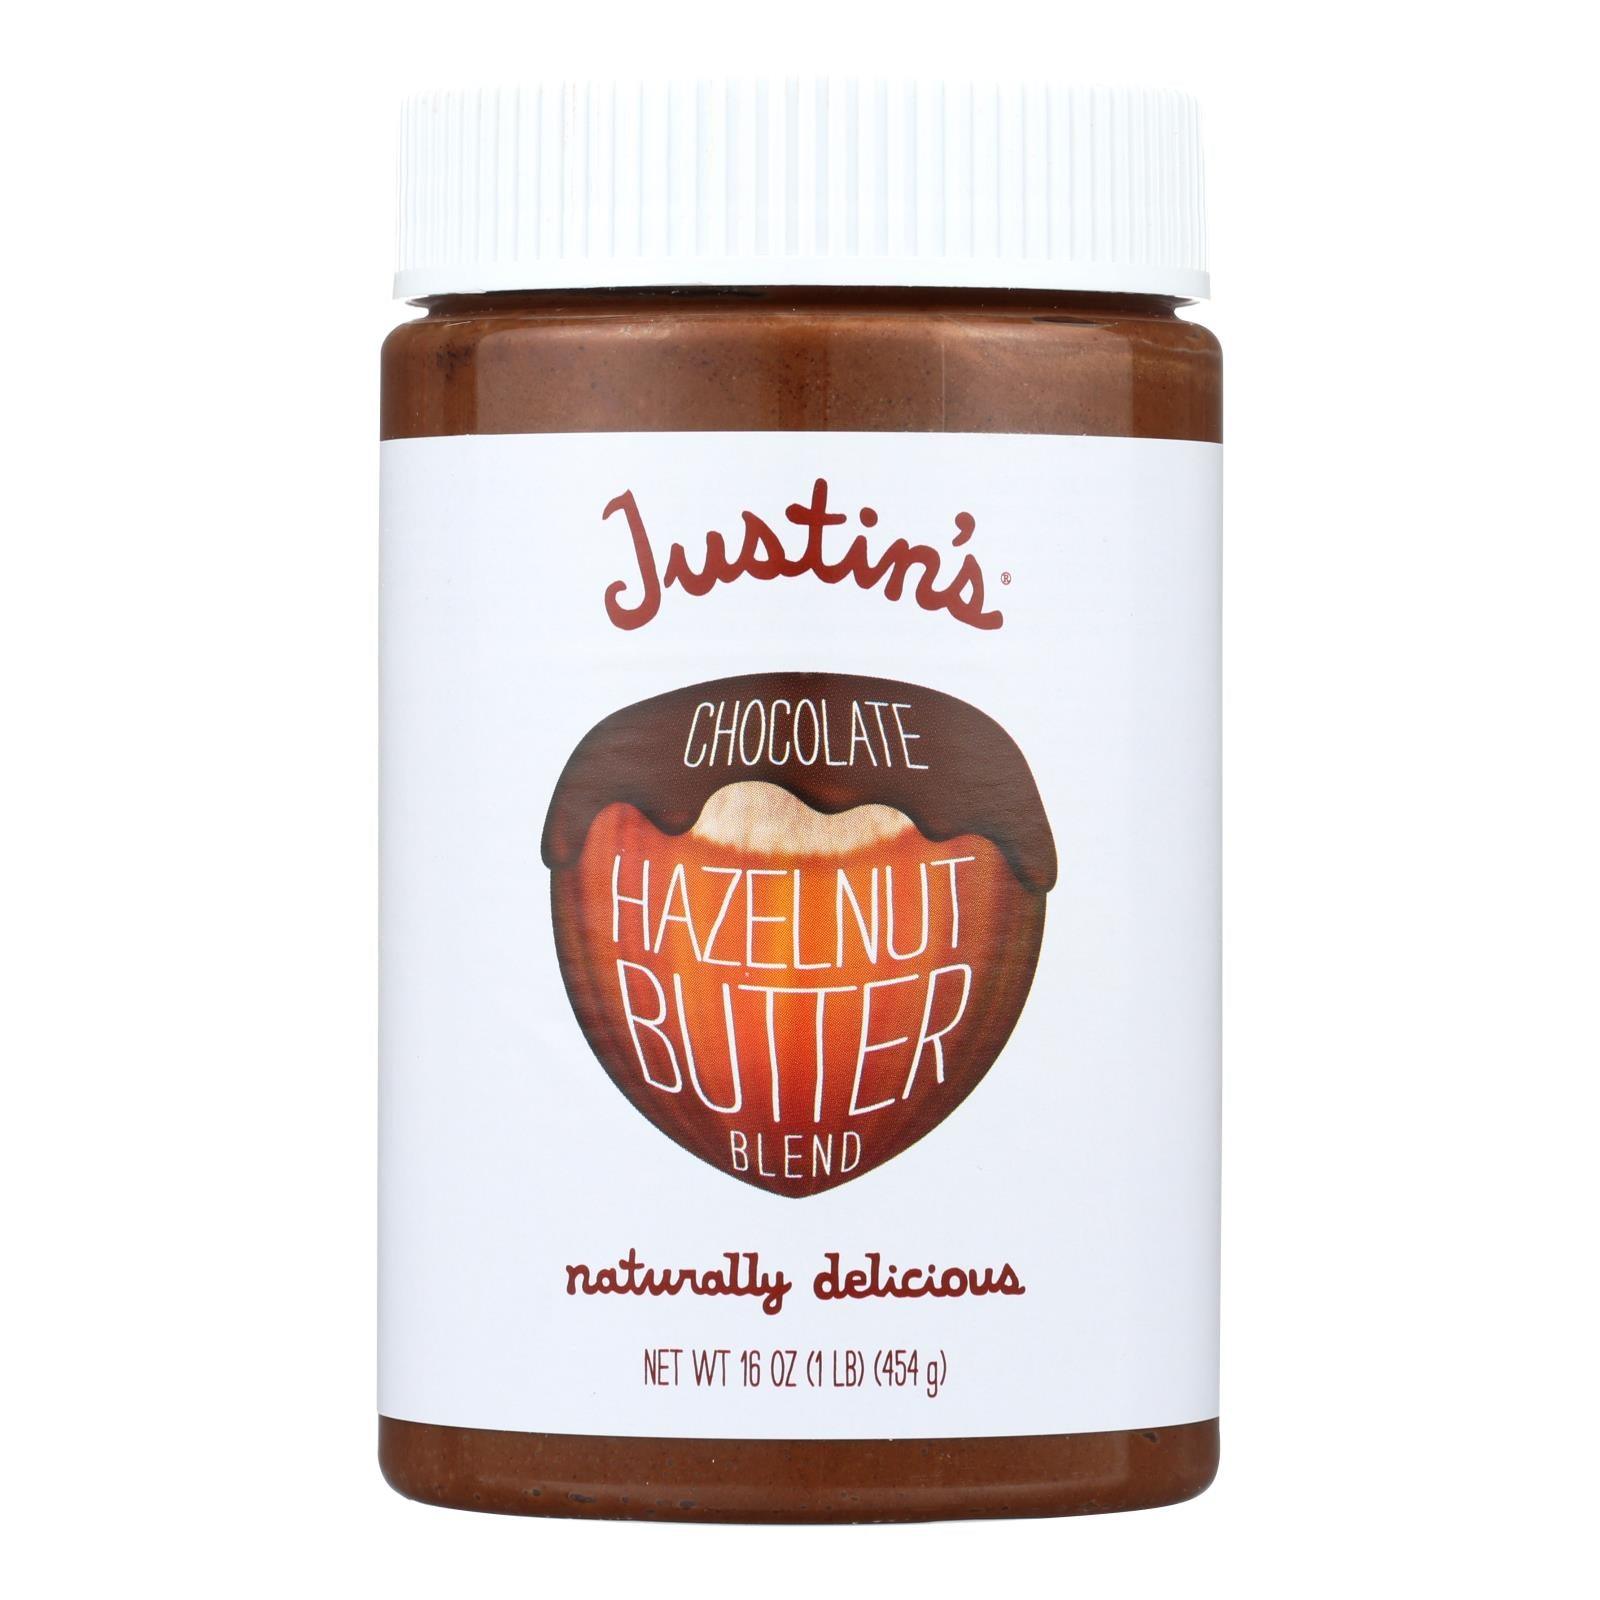 Justin's Nut Butter Hazelnut Butter - Chocolate - Case Of 6 - 16 Oz. - Loomini